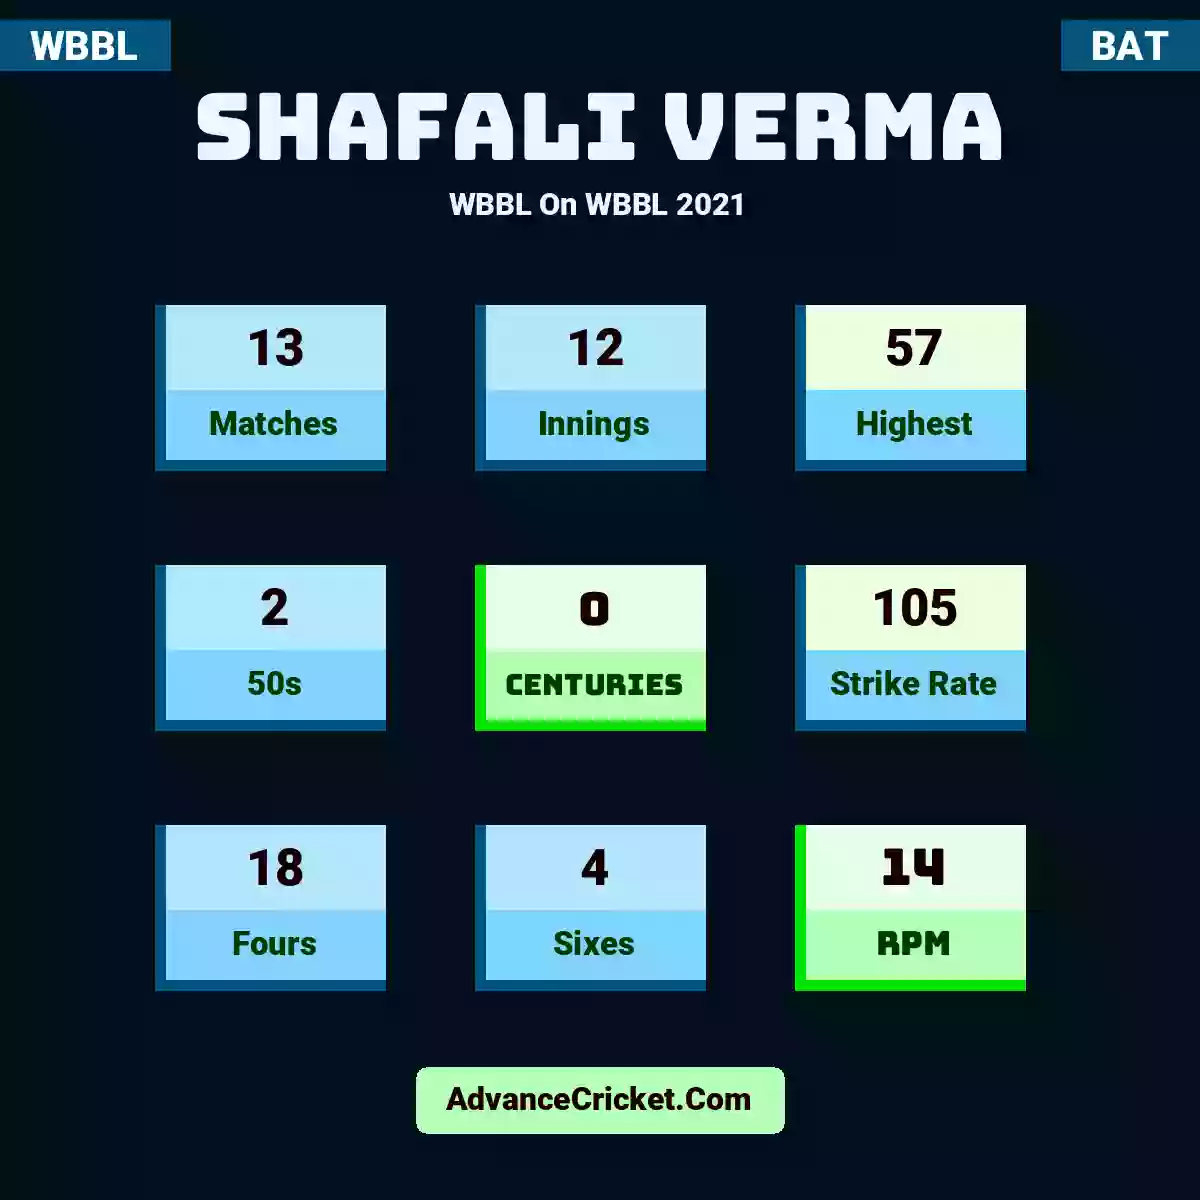 Shafali Verma WBBL  On WBBL 2021, Shafali Verma played 13 matches, scored 57 runs as highest, 2 half-centuries, and 0 centuries, with a strike rate of 105. S.Verma hit 18 fours and 4 sixes, with an RPM of 14.